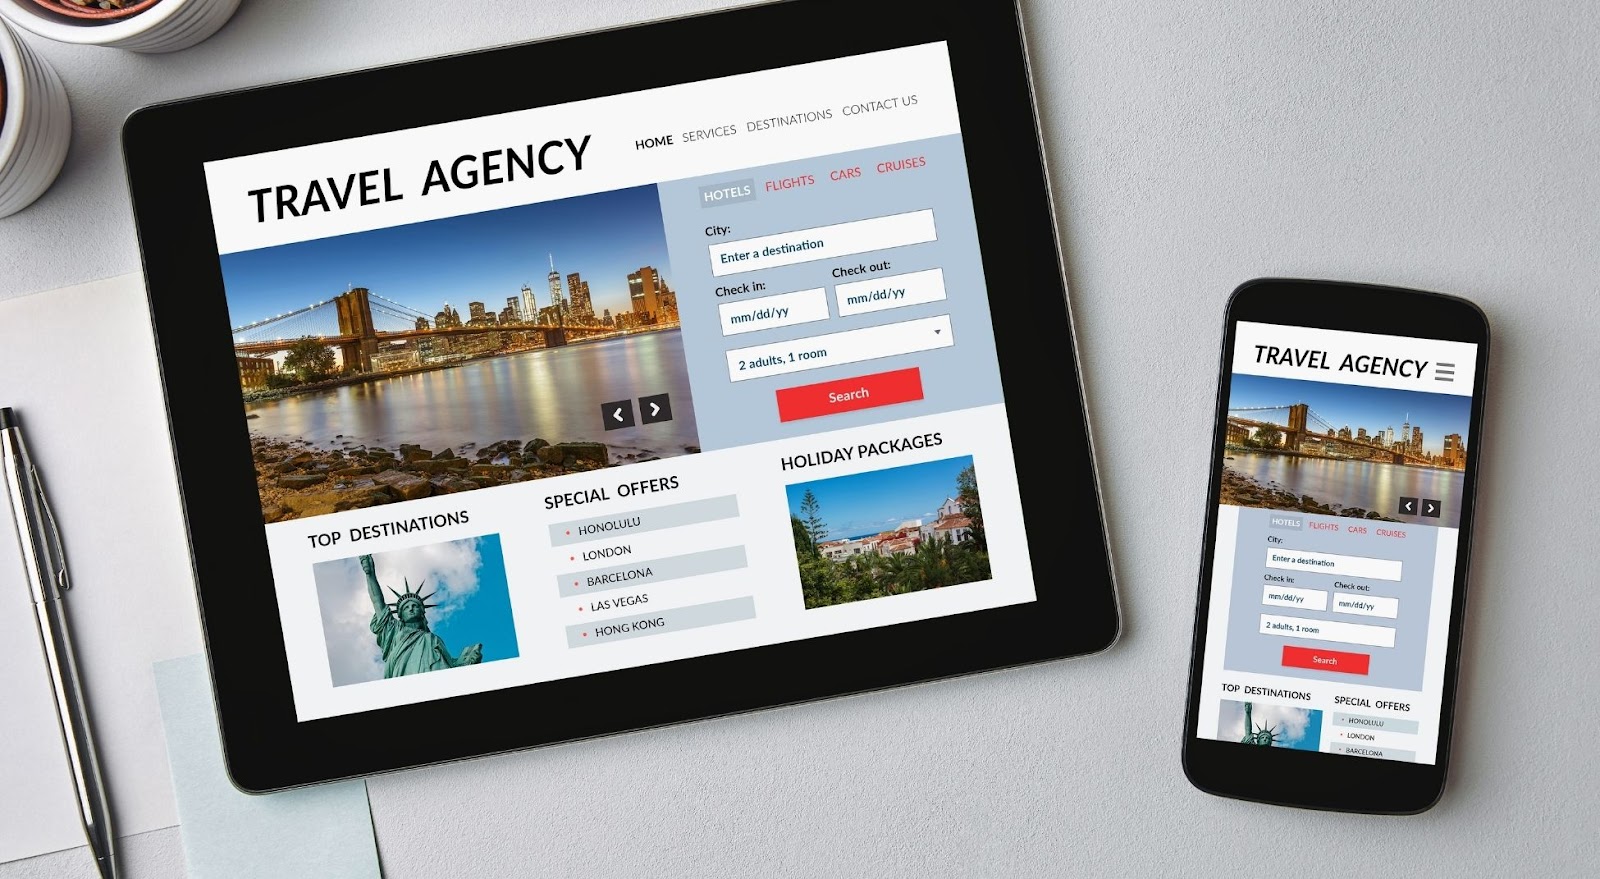 Tablet and mobile devices showing travel agency website for booking hotels, flights, and more.